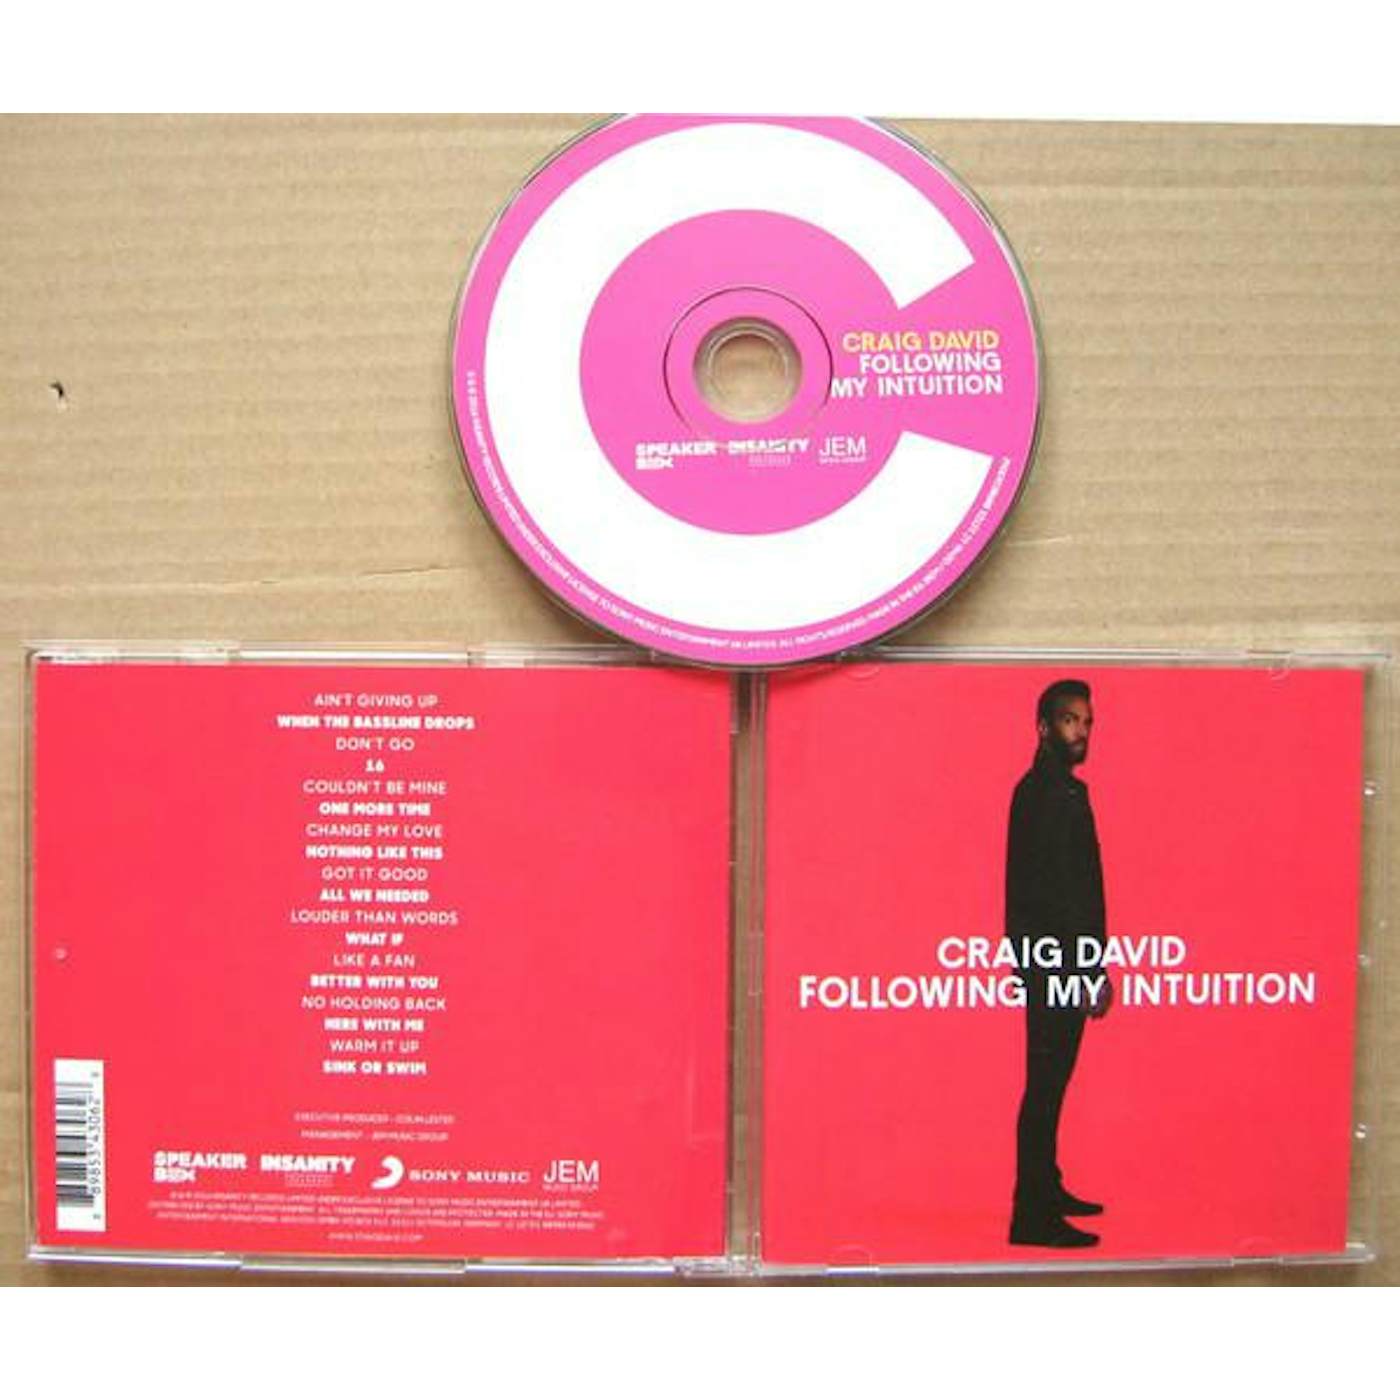 Craig David FOLLOWING MY INTUITION (DELUXE) CD